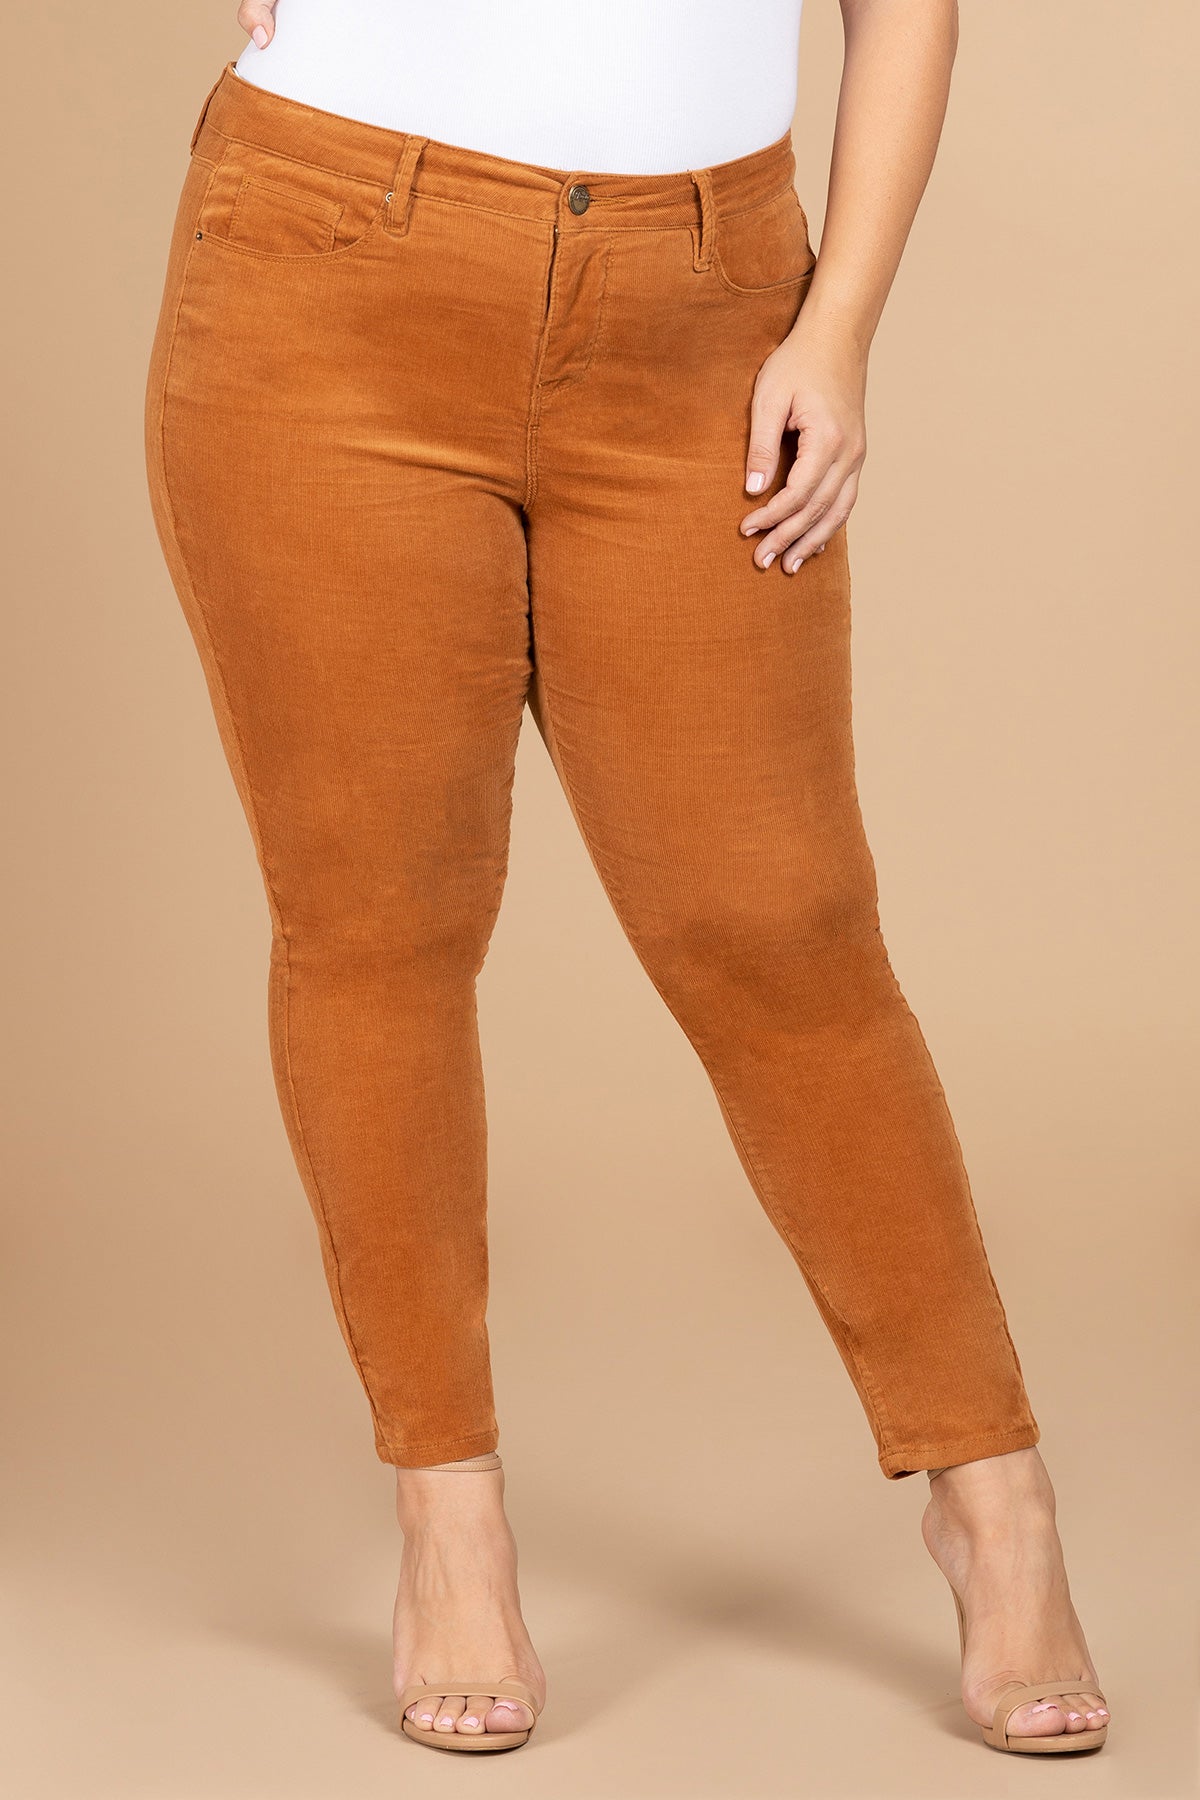 Women Plus Size Hide Your Muffin Top High Rise Corduroy Skinny Pant Xp796595